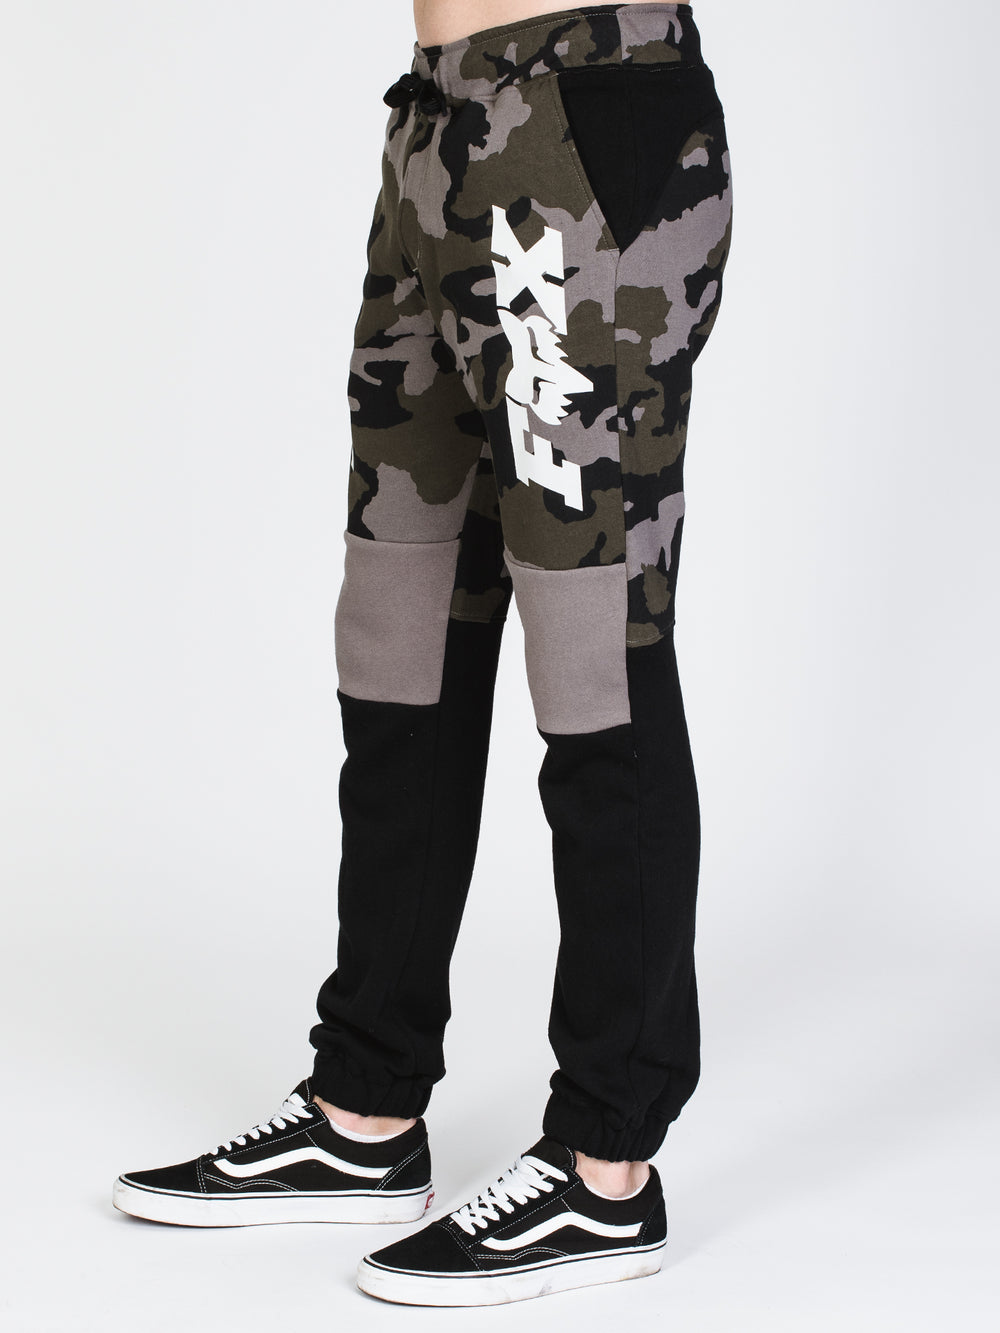 MENS LATERAL MOTO PANT - CAMO - CLEARANCE